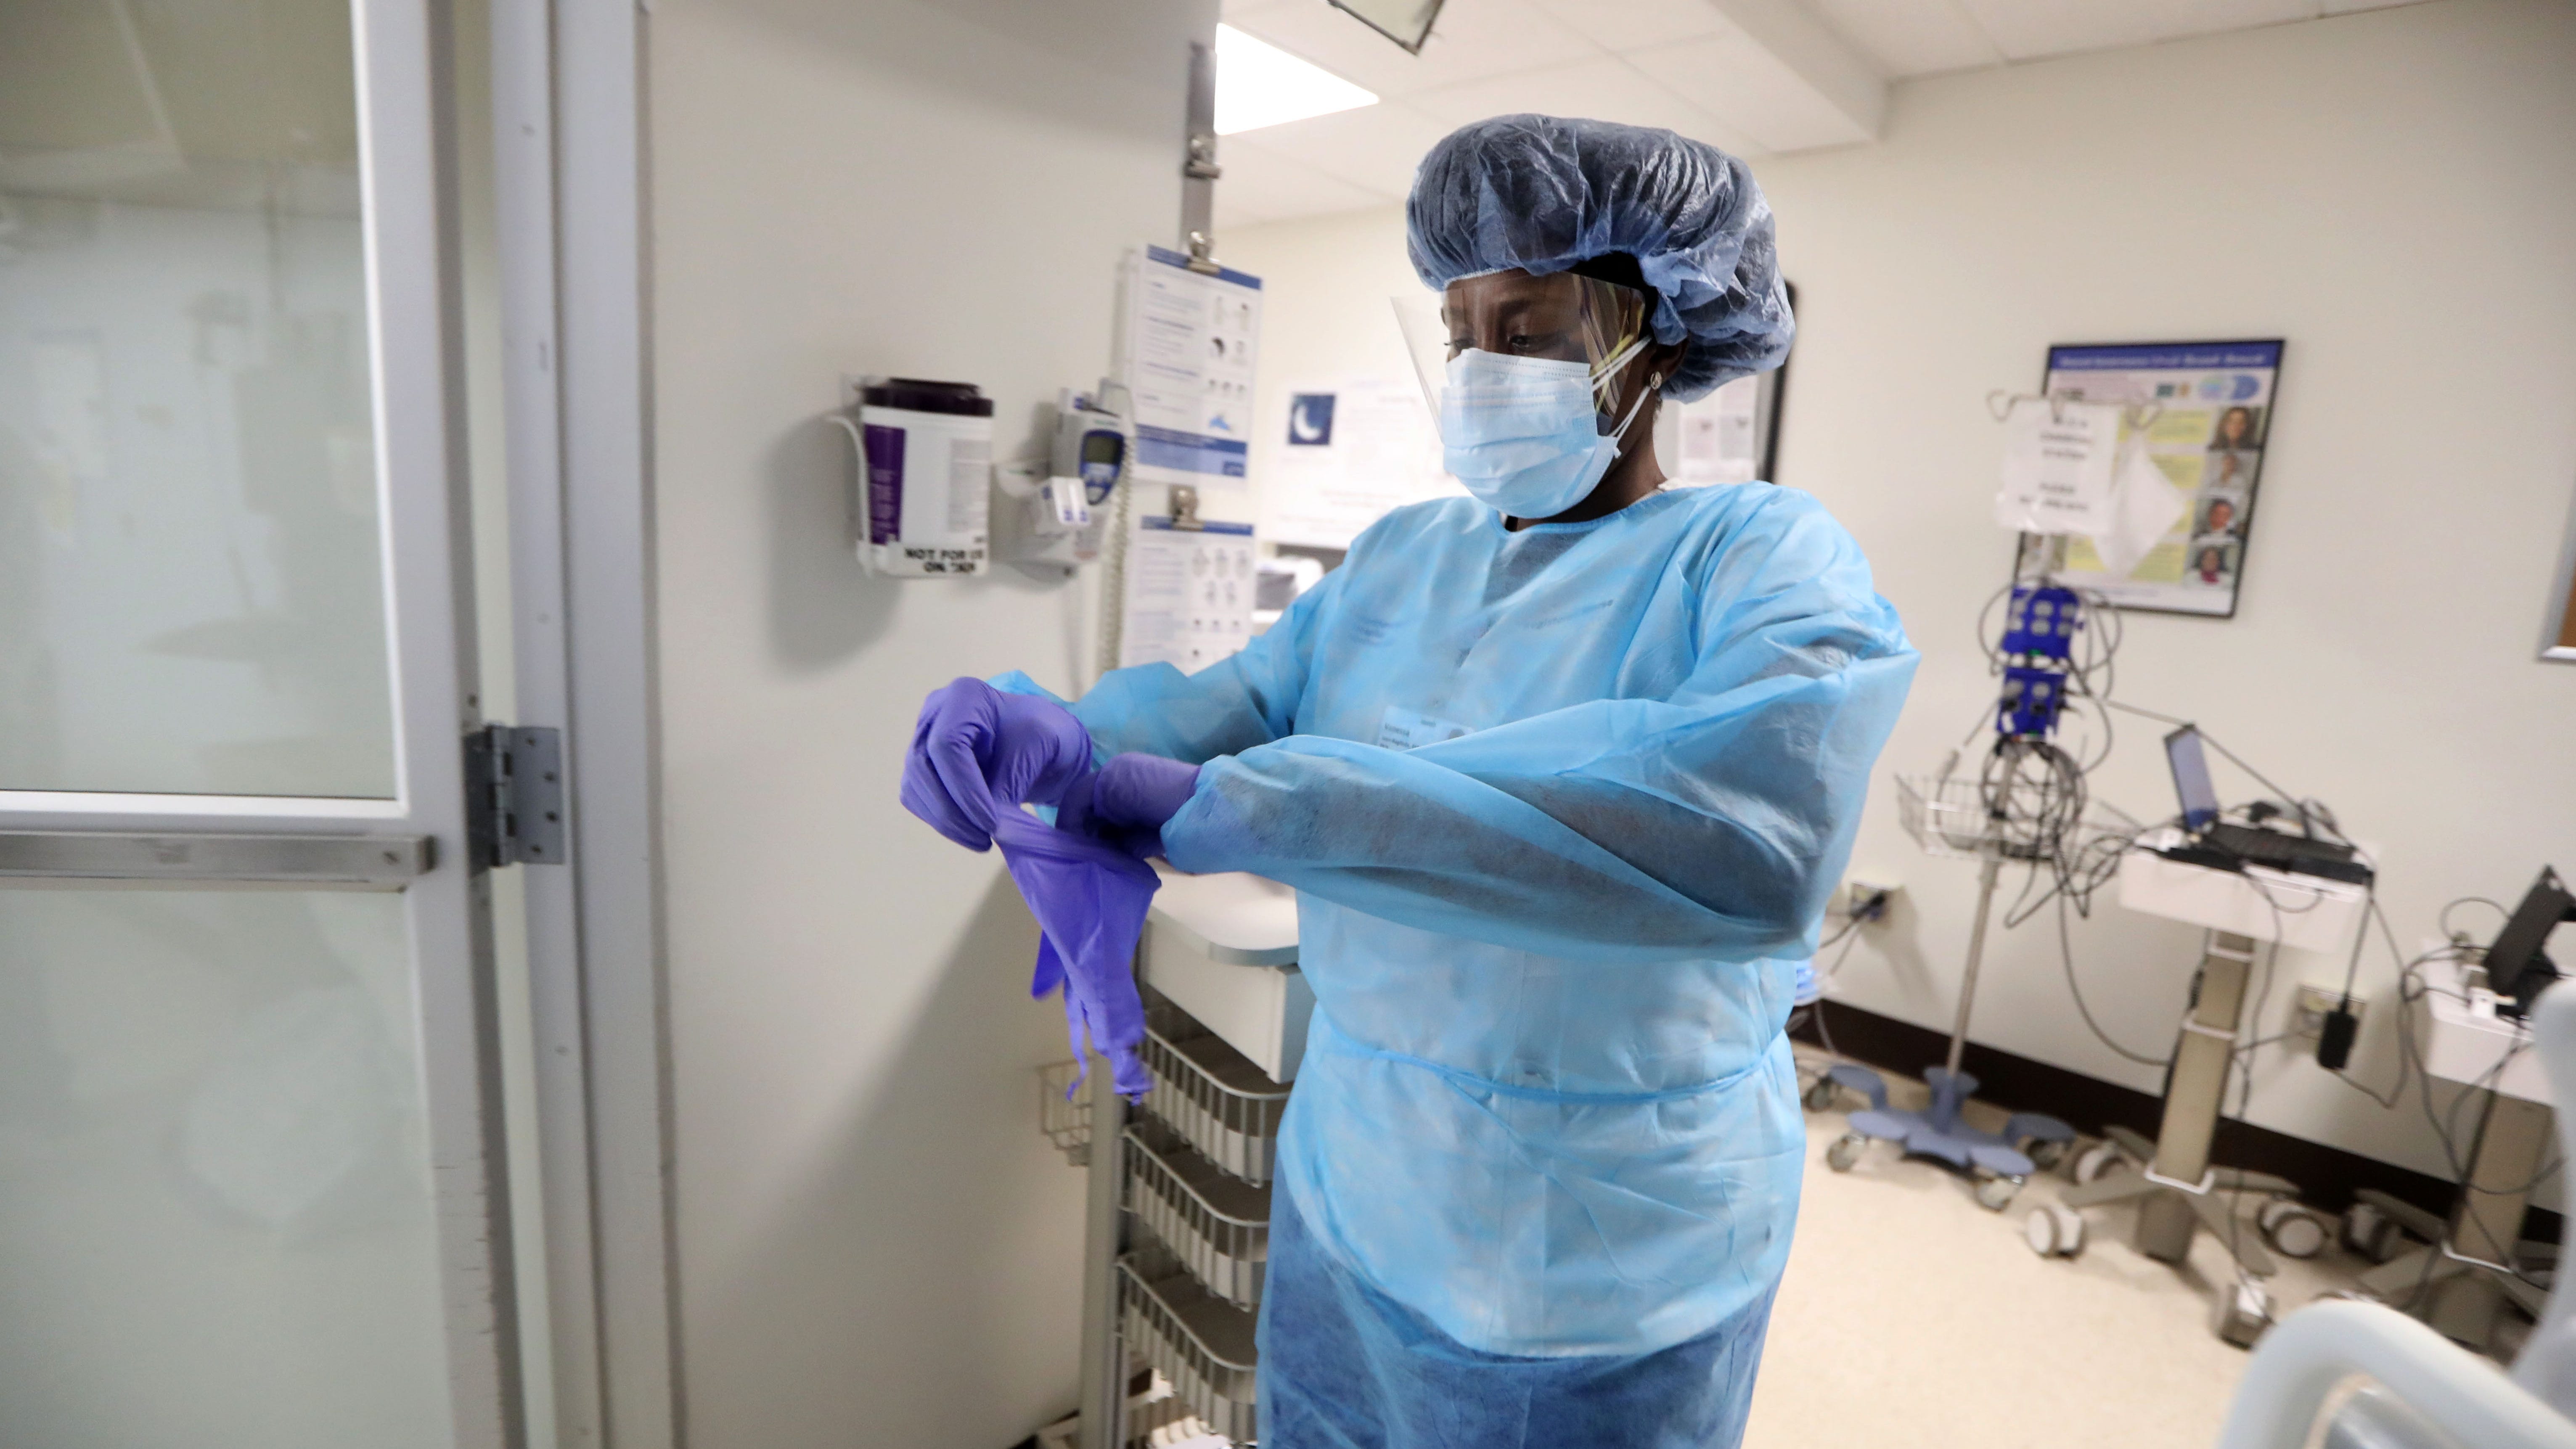 Vanessa Jean-Baptiste, a registered nurse in the intensive care unit at Northern Westchester Hospital in Mount Kisco, New York, dons PPE equipment before entering the room of a patient with COVID-19 on March 1, 2022.